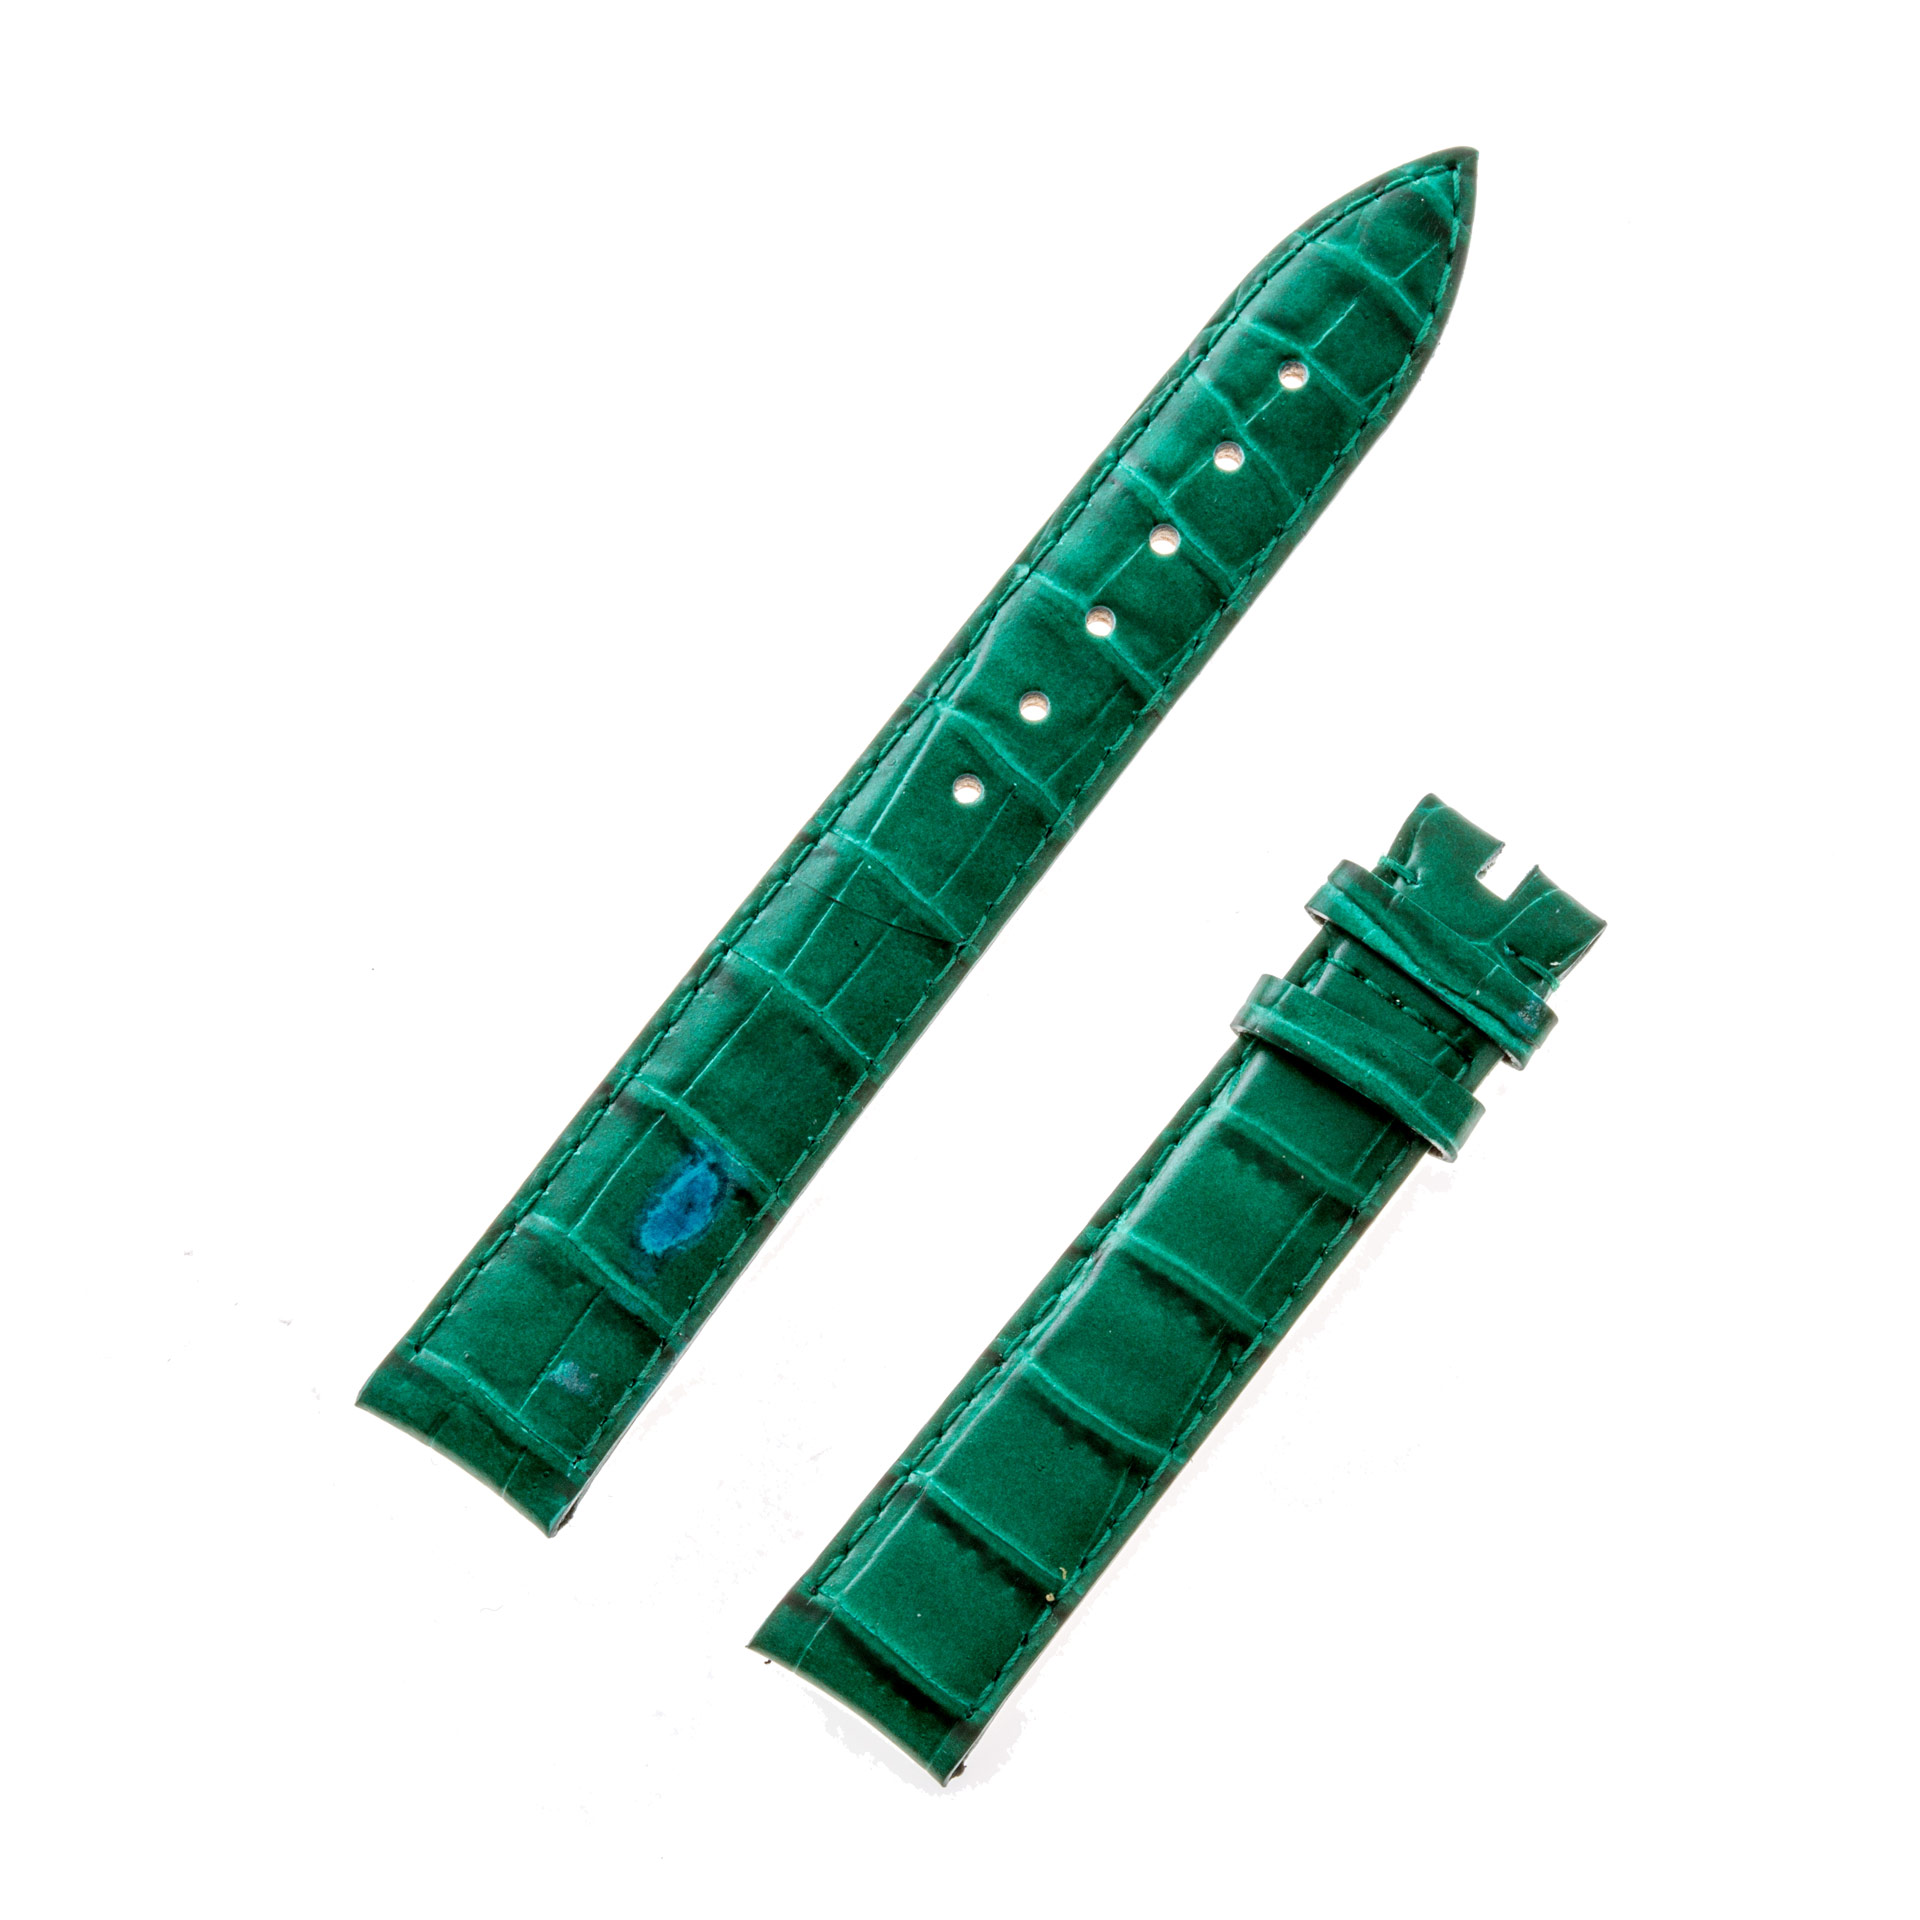 Chopard green alligator leather strap for Be Happy for tang buckle 15mm x 14mm